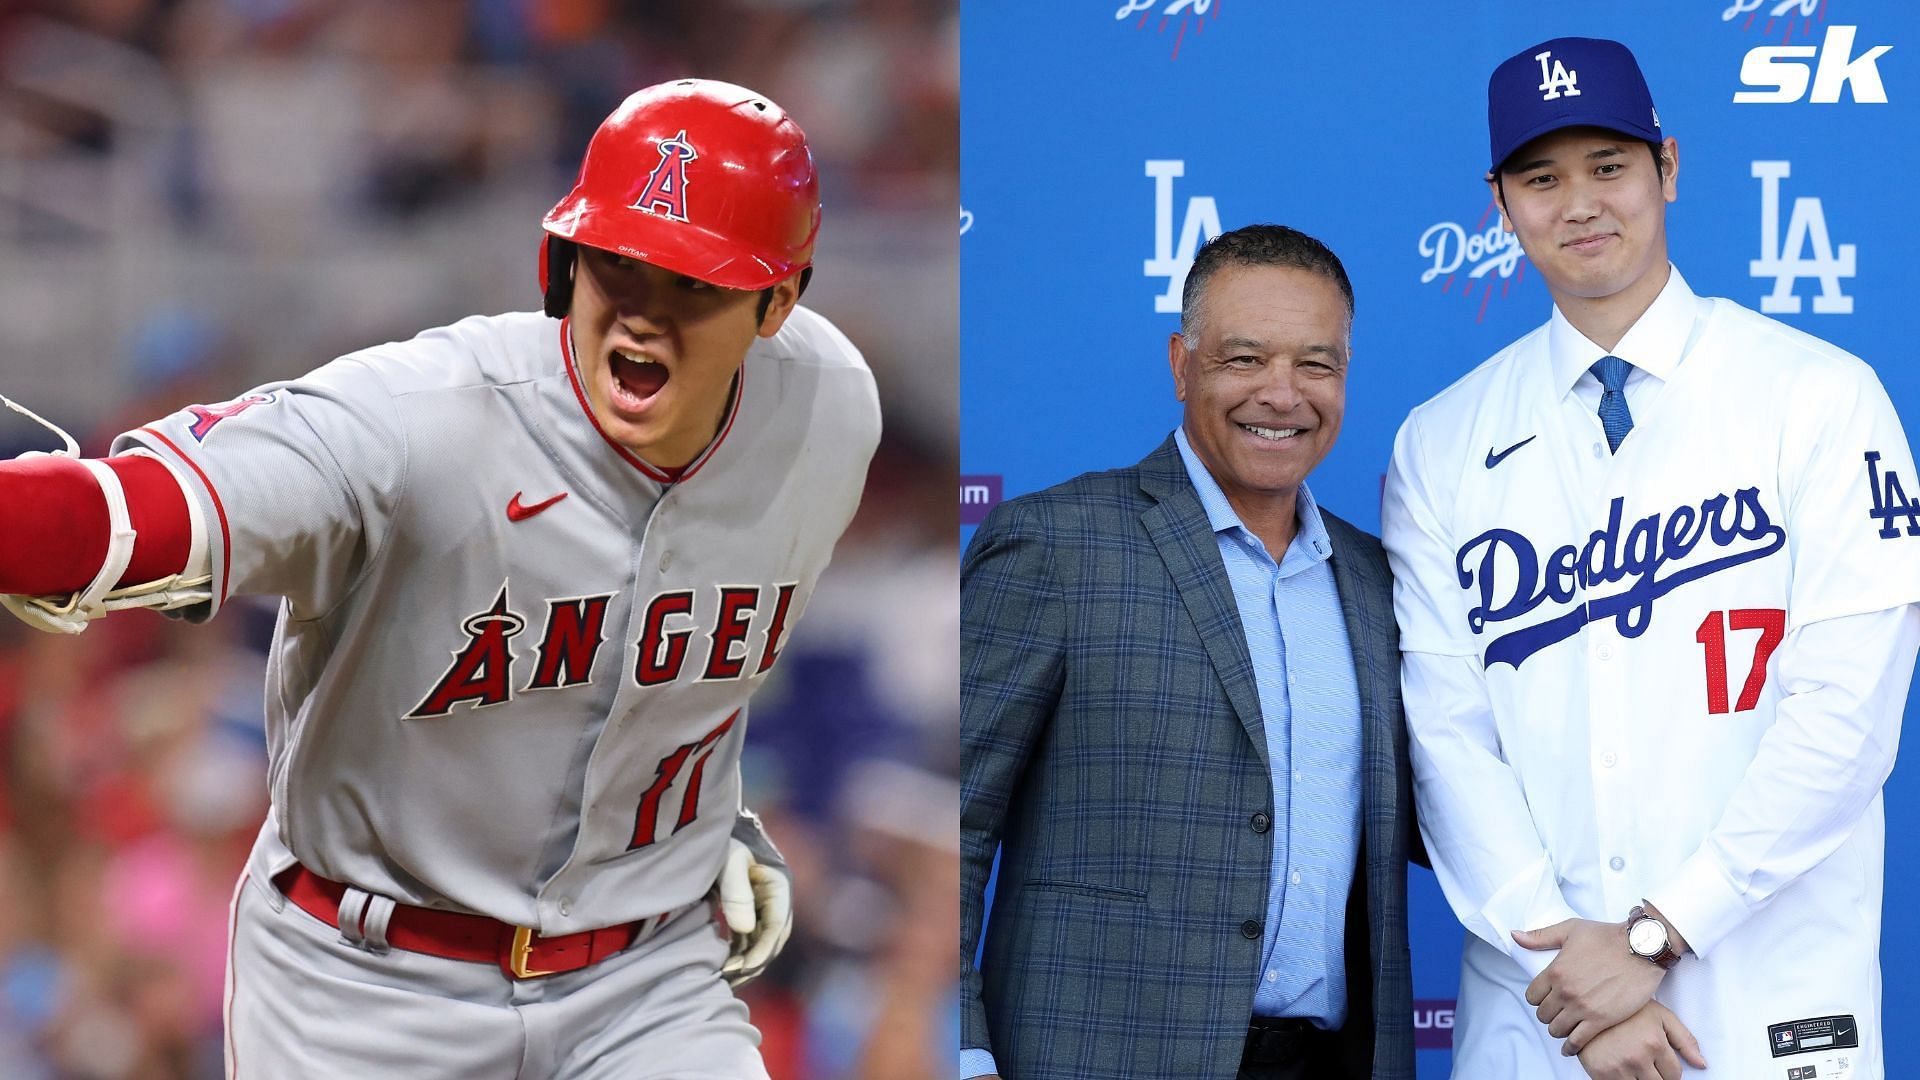 MLB fans jibe at California controller after her outcry on Shohei Ohtani&rsquo;s contract. 